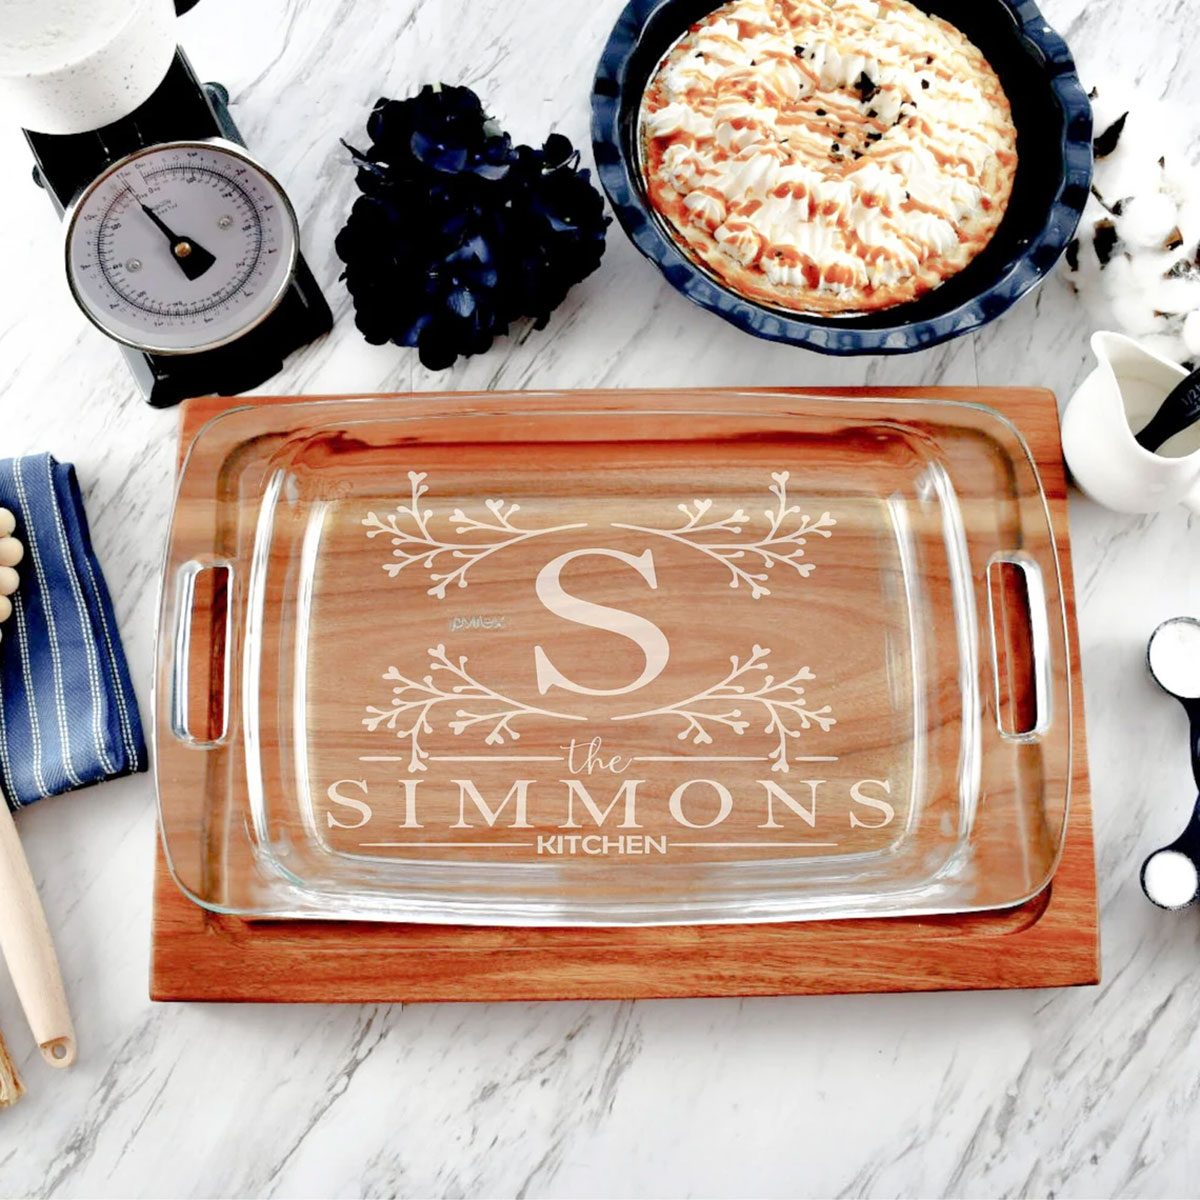 11 Amazing Holiday Gifts for Bakers - The Baker's Almanac